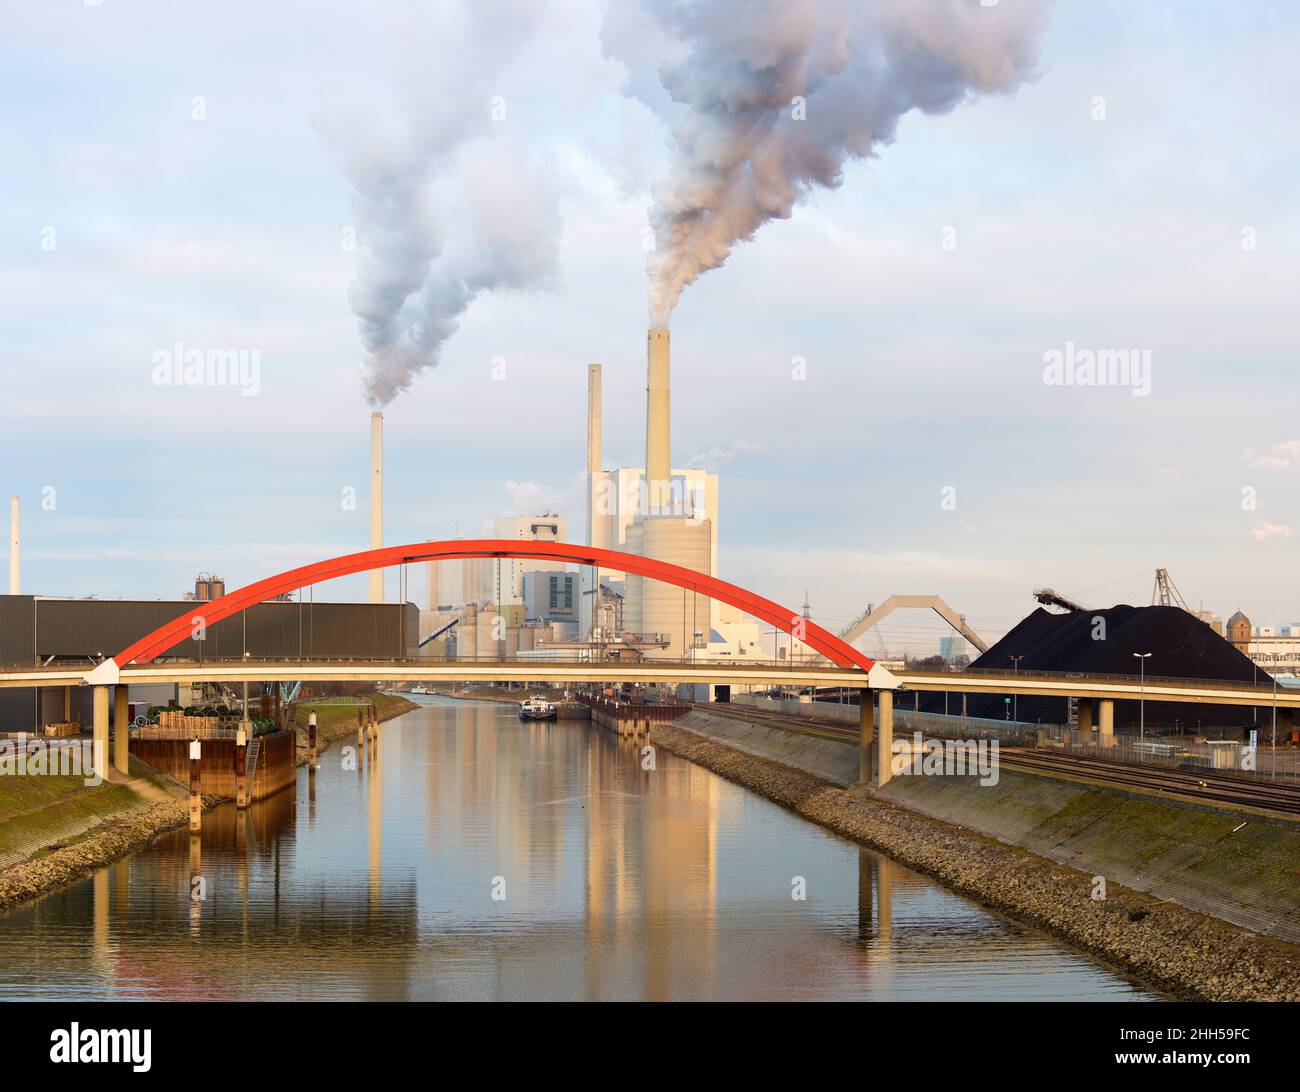 Coal power station causing global warming an climate change Stock Photo